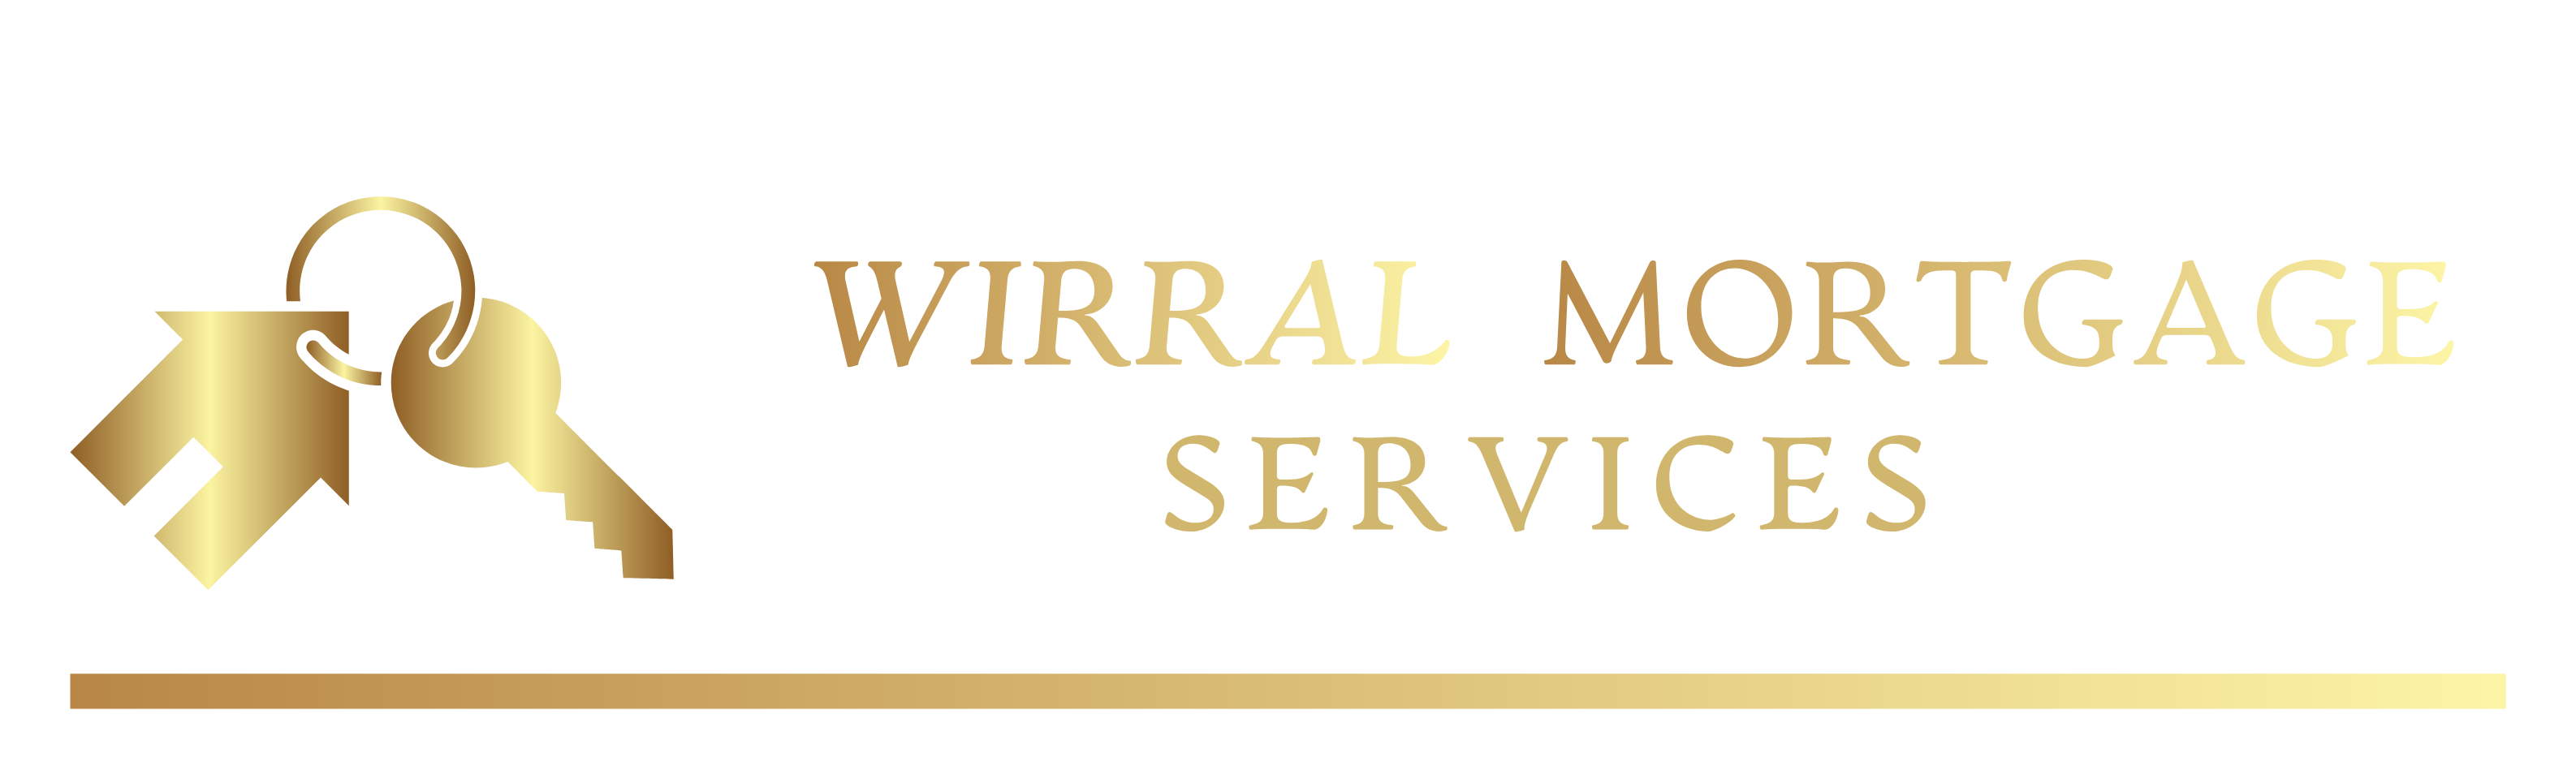 Wirral Mortgage Services Logo